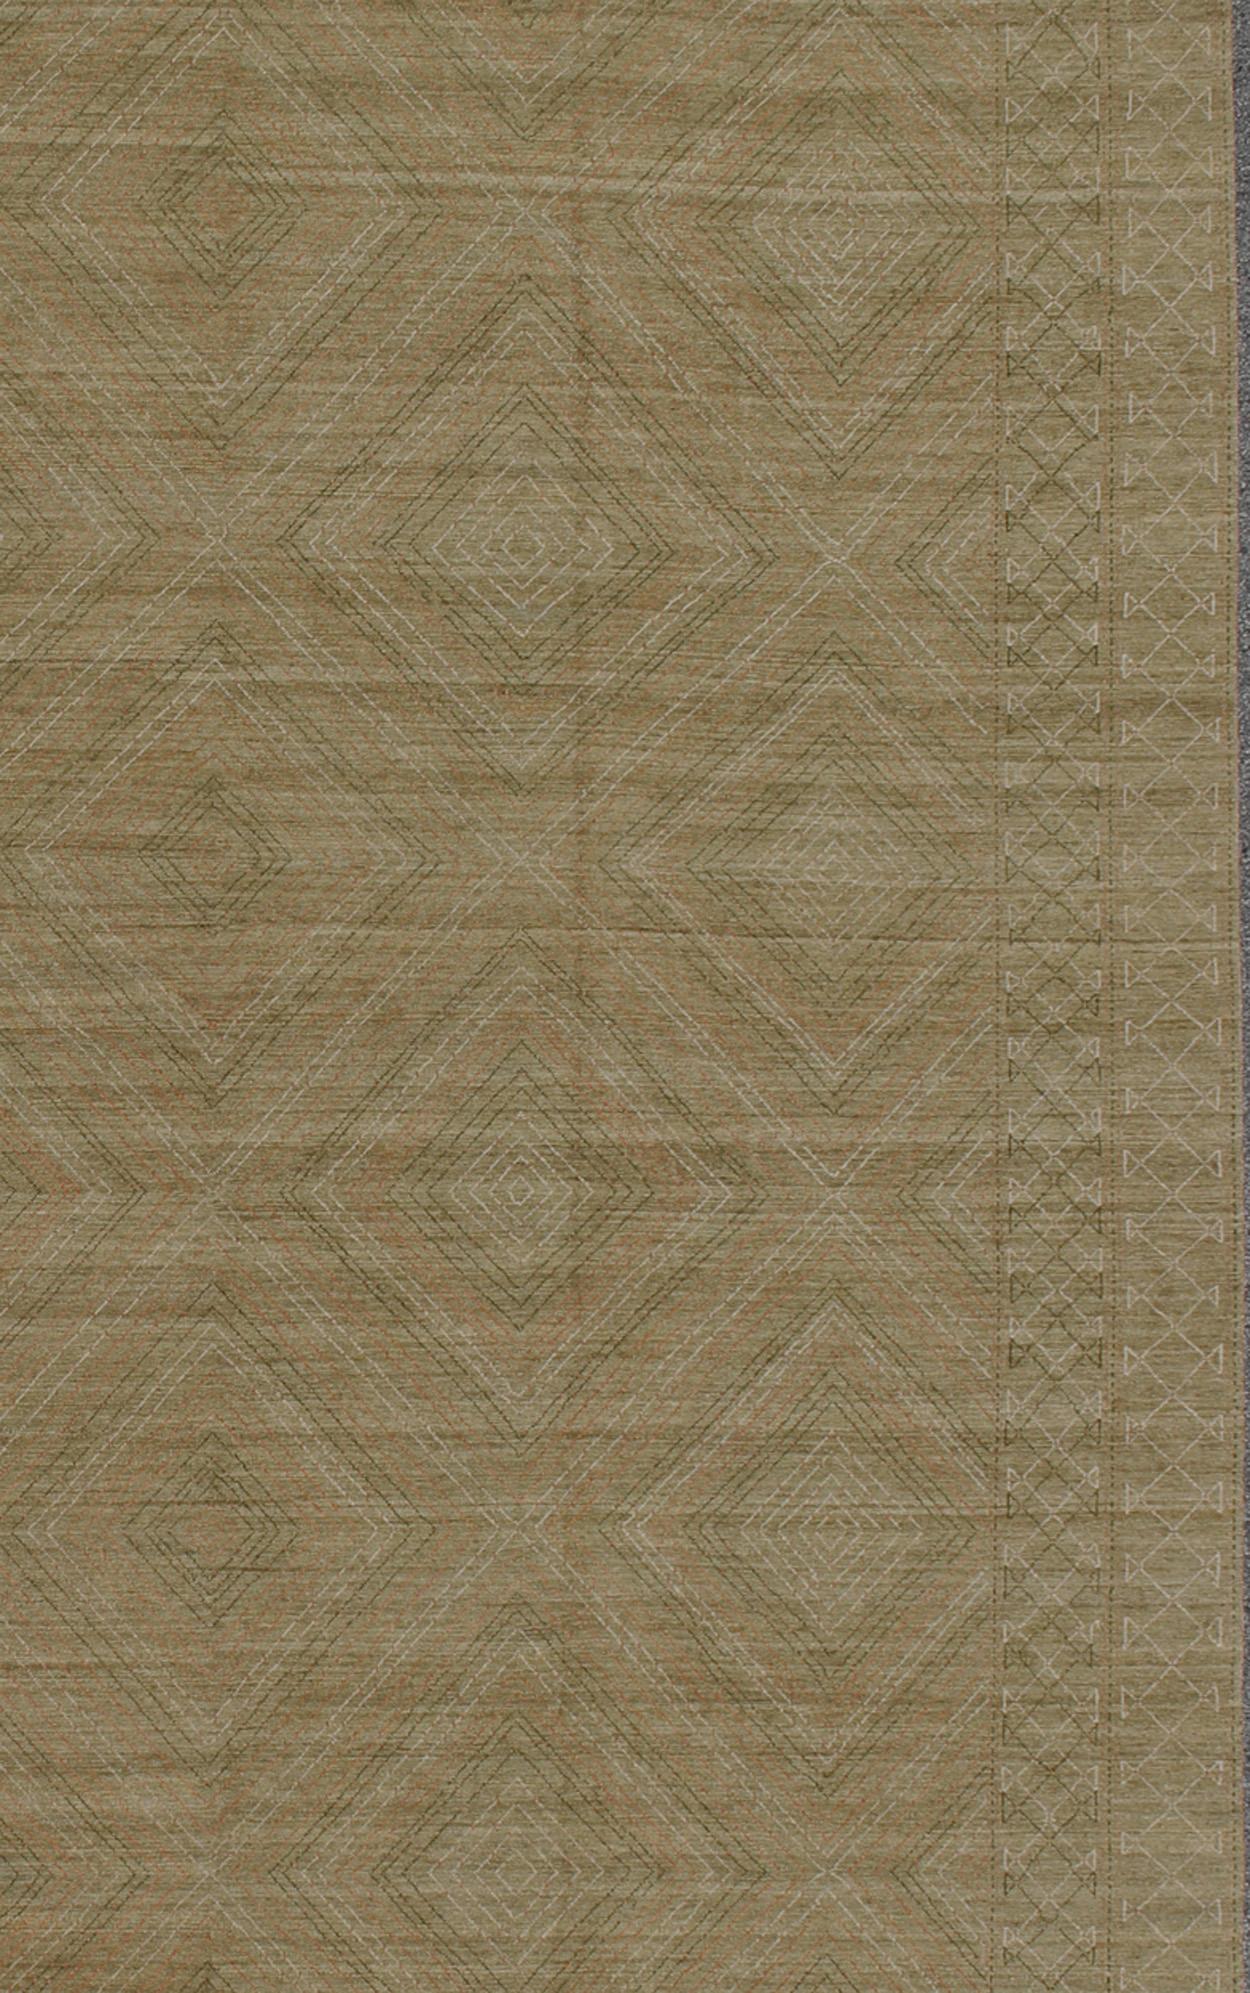 Modern rug with all-over modern diamond design, rug KOL-60809 country of origin / type: Afghanistan/ Modern

This modern rug with a contemporary design rendered in connected diamond pattern, features green background and ivory, pink, and shades of